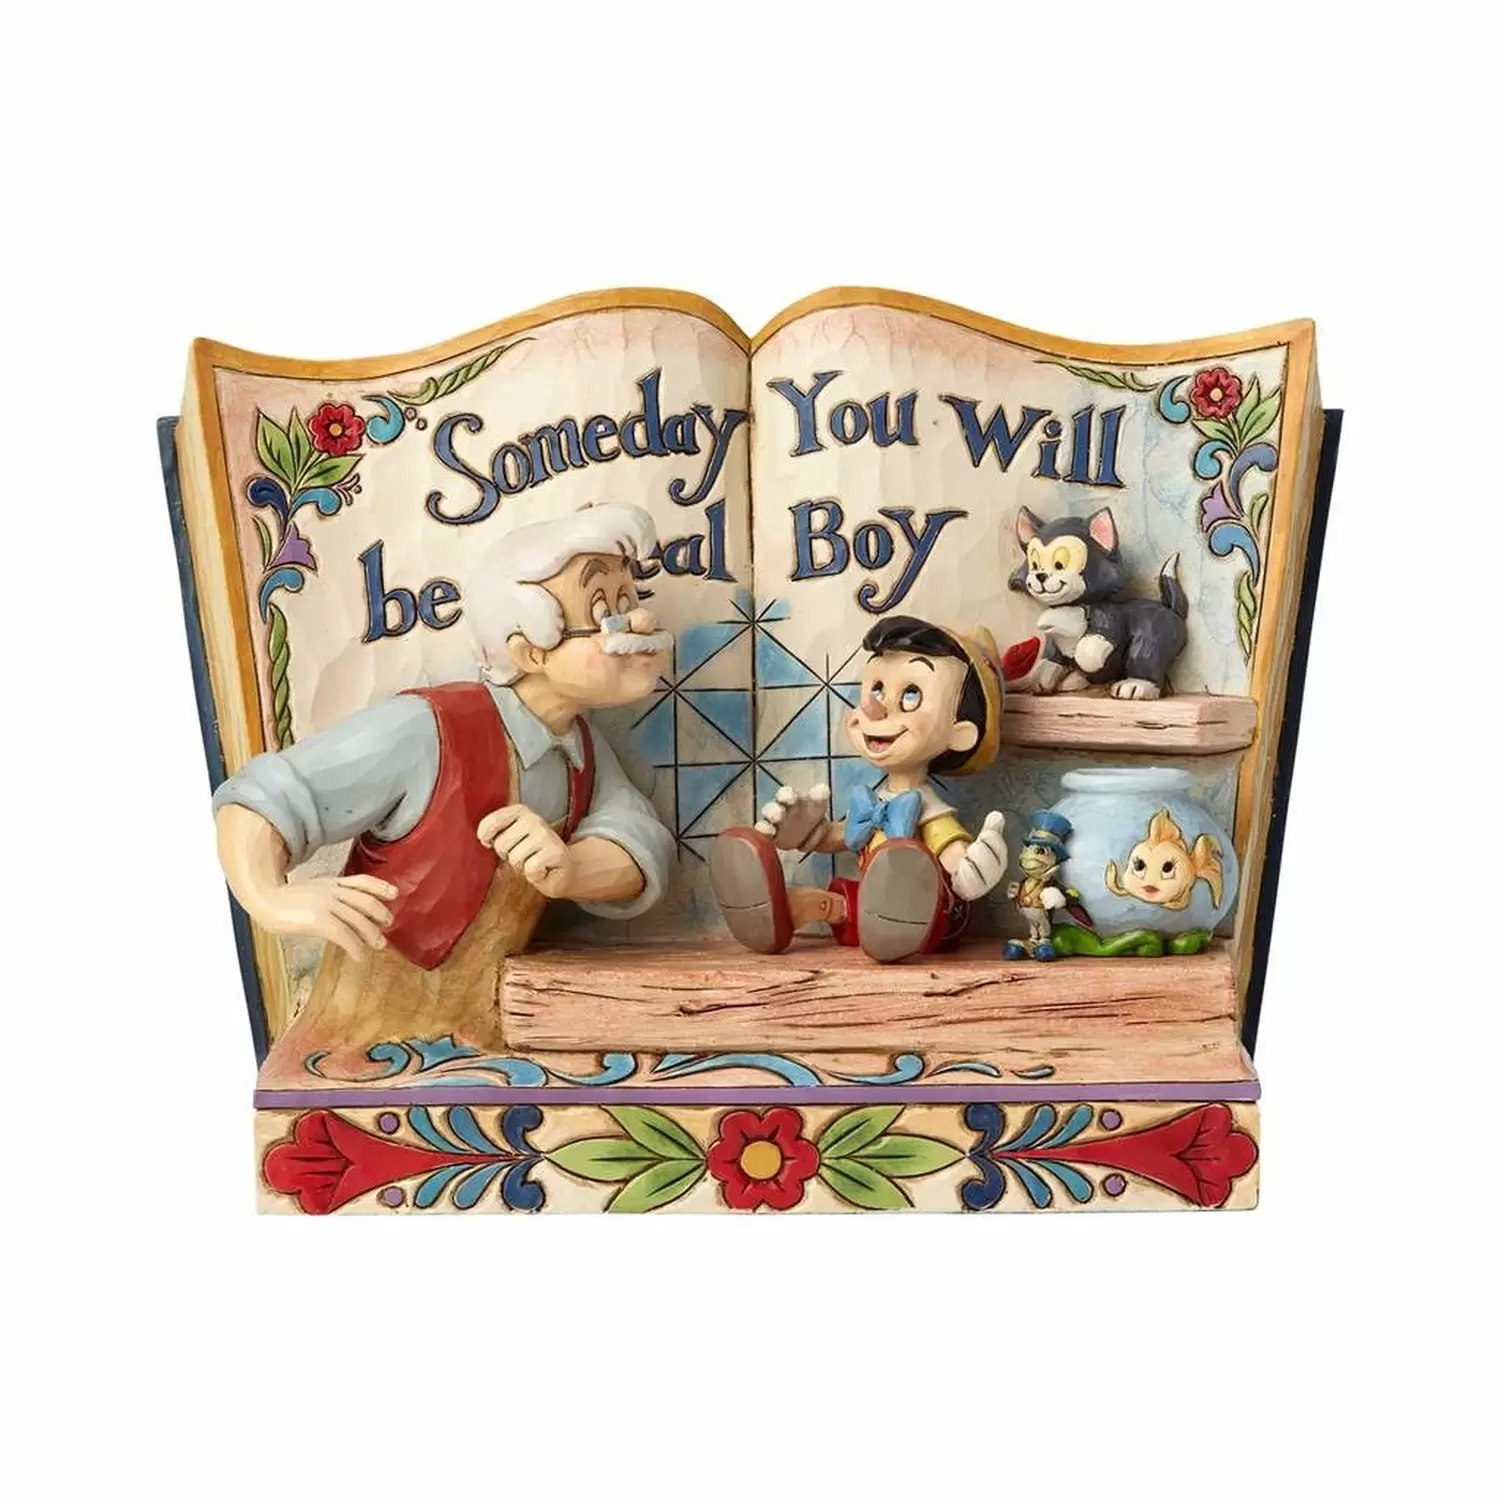 Disney Traditions by Jim Shore - Someday You Will Be A Real Boy - Pinocchio Storybook